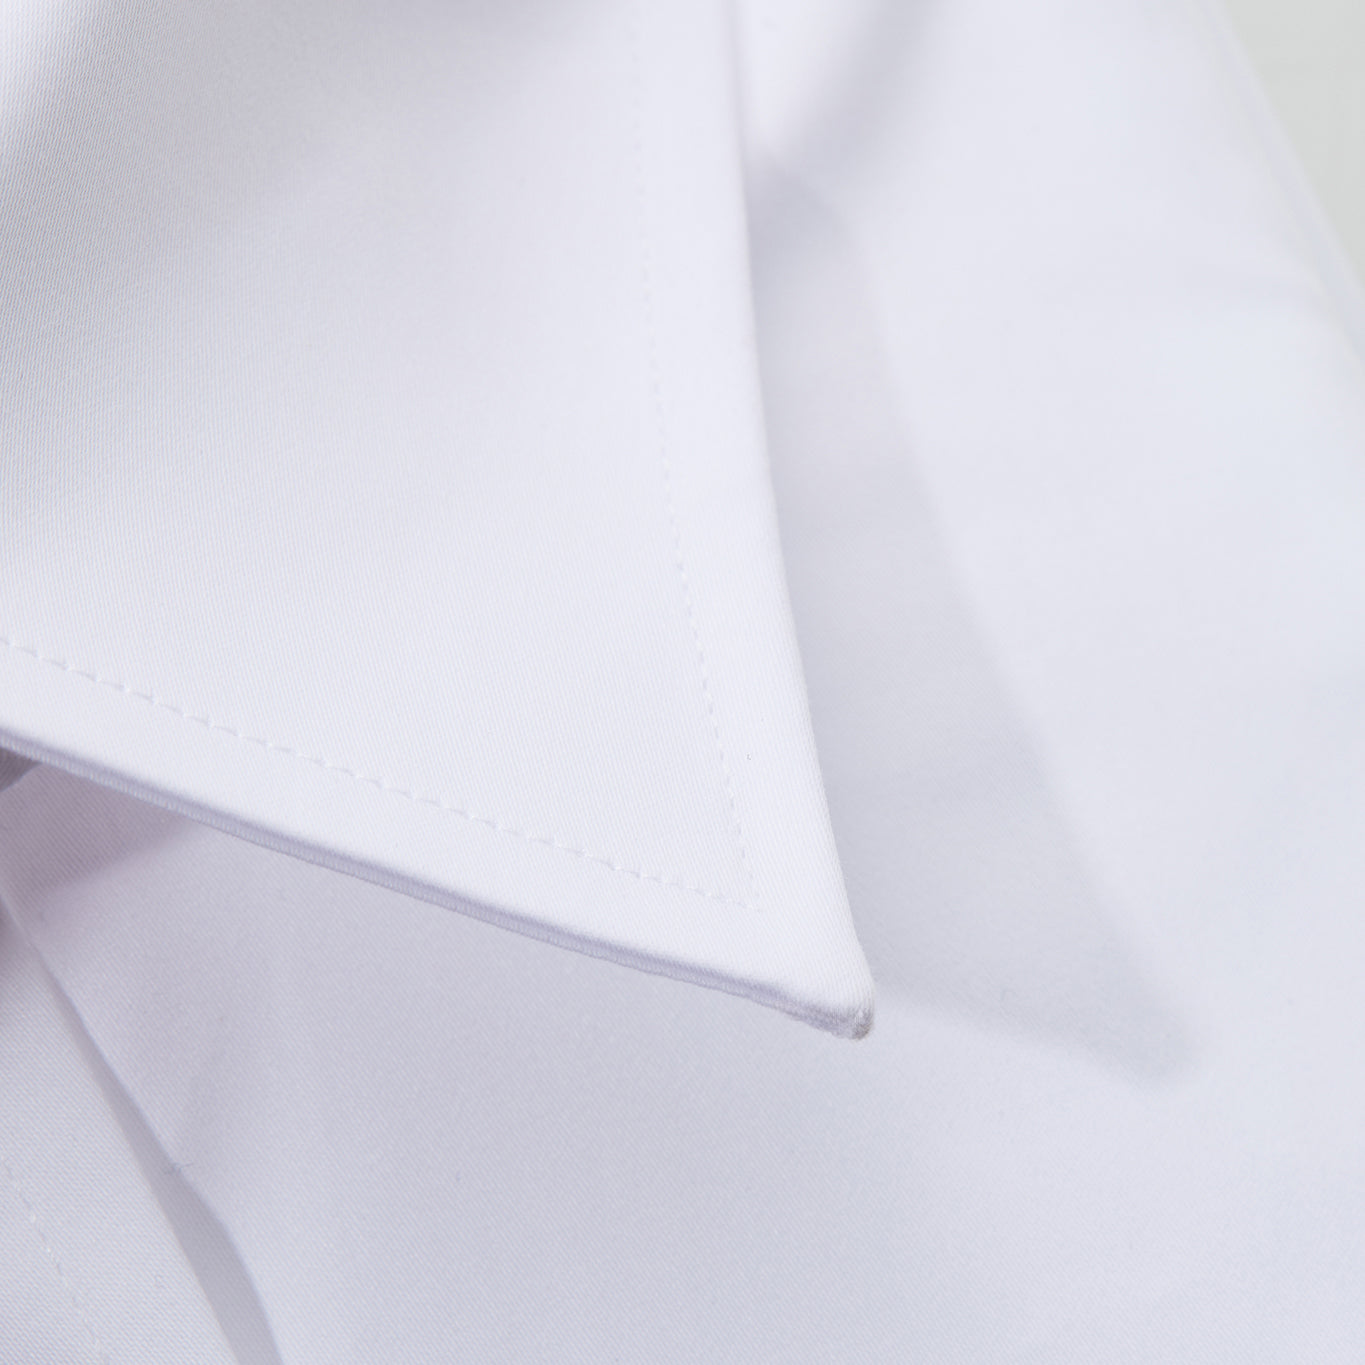 Close-up of a collar tip on a white shirt